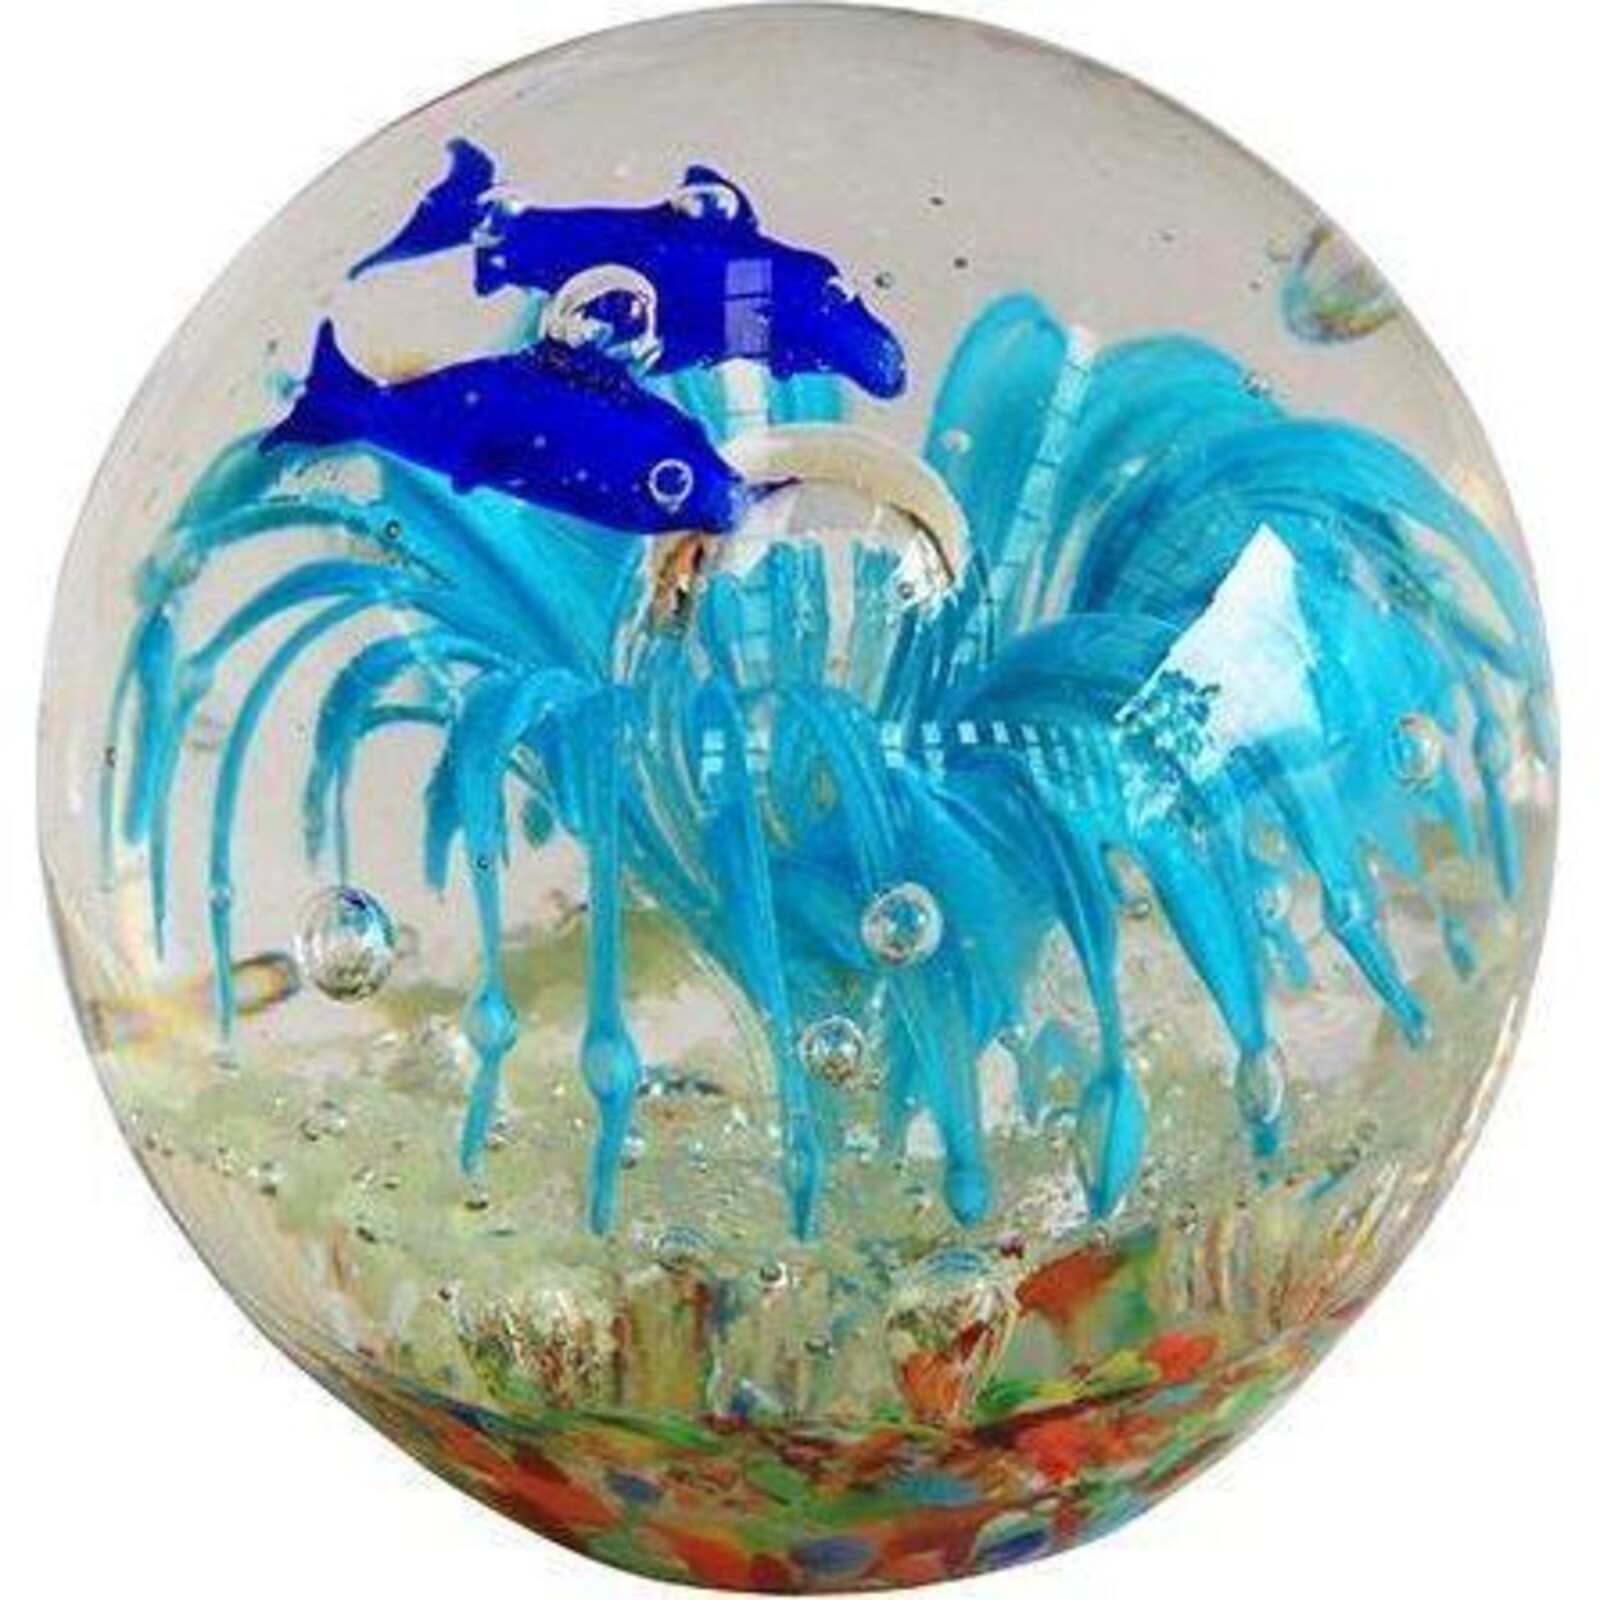 Paperweight Two Fish Ball